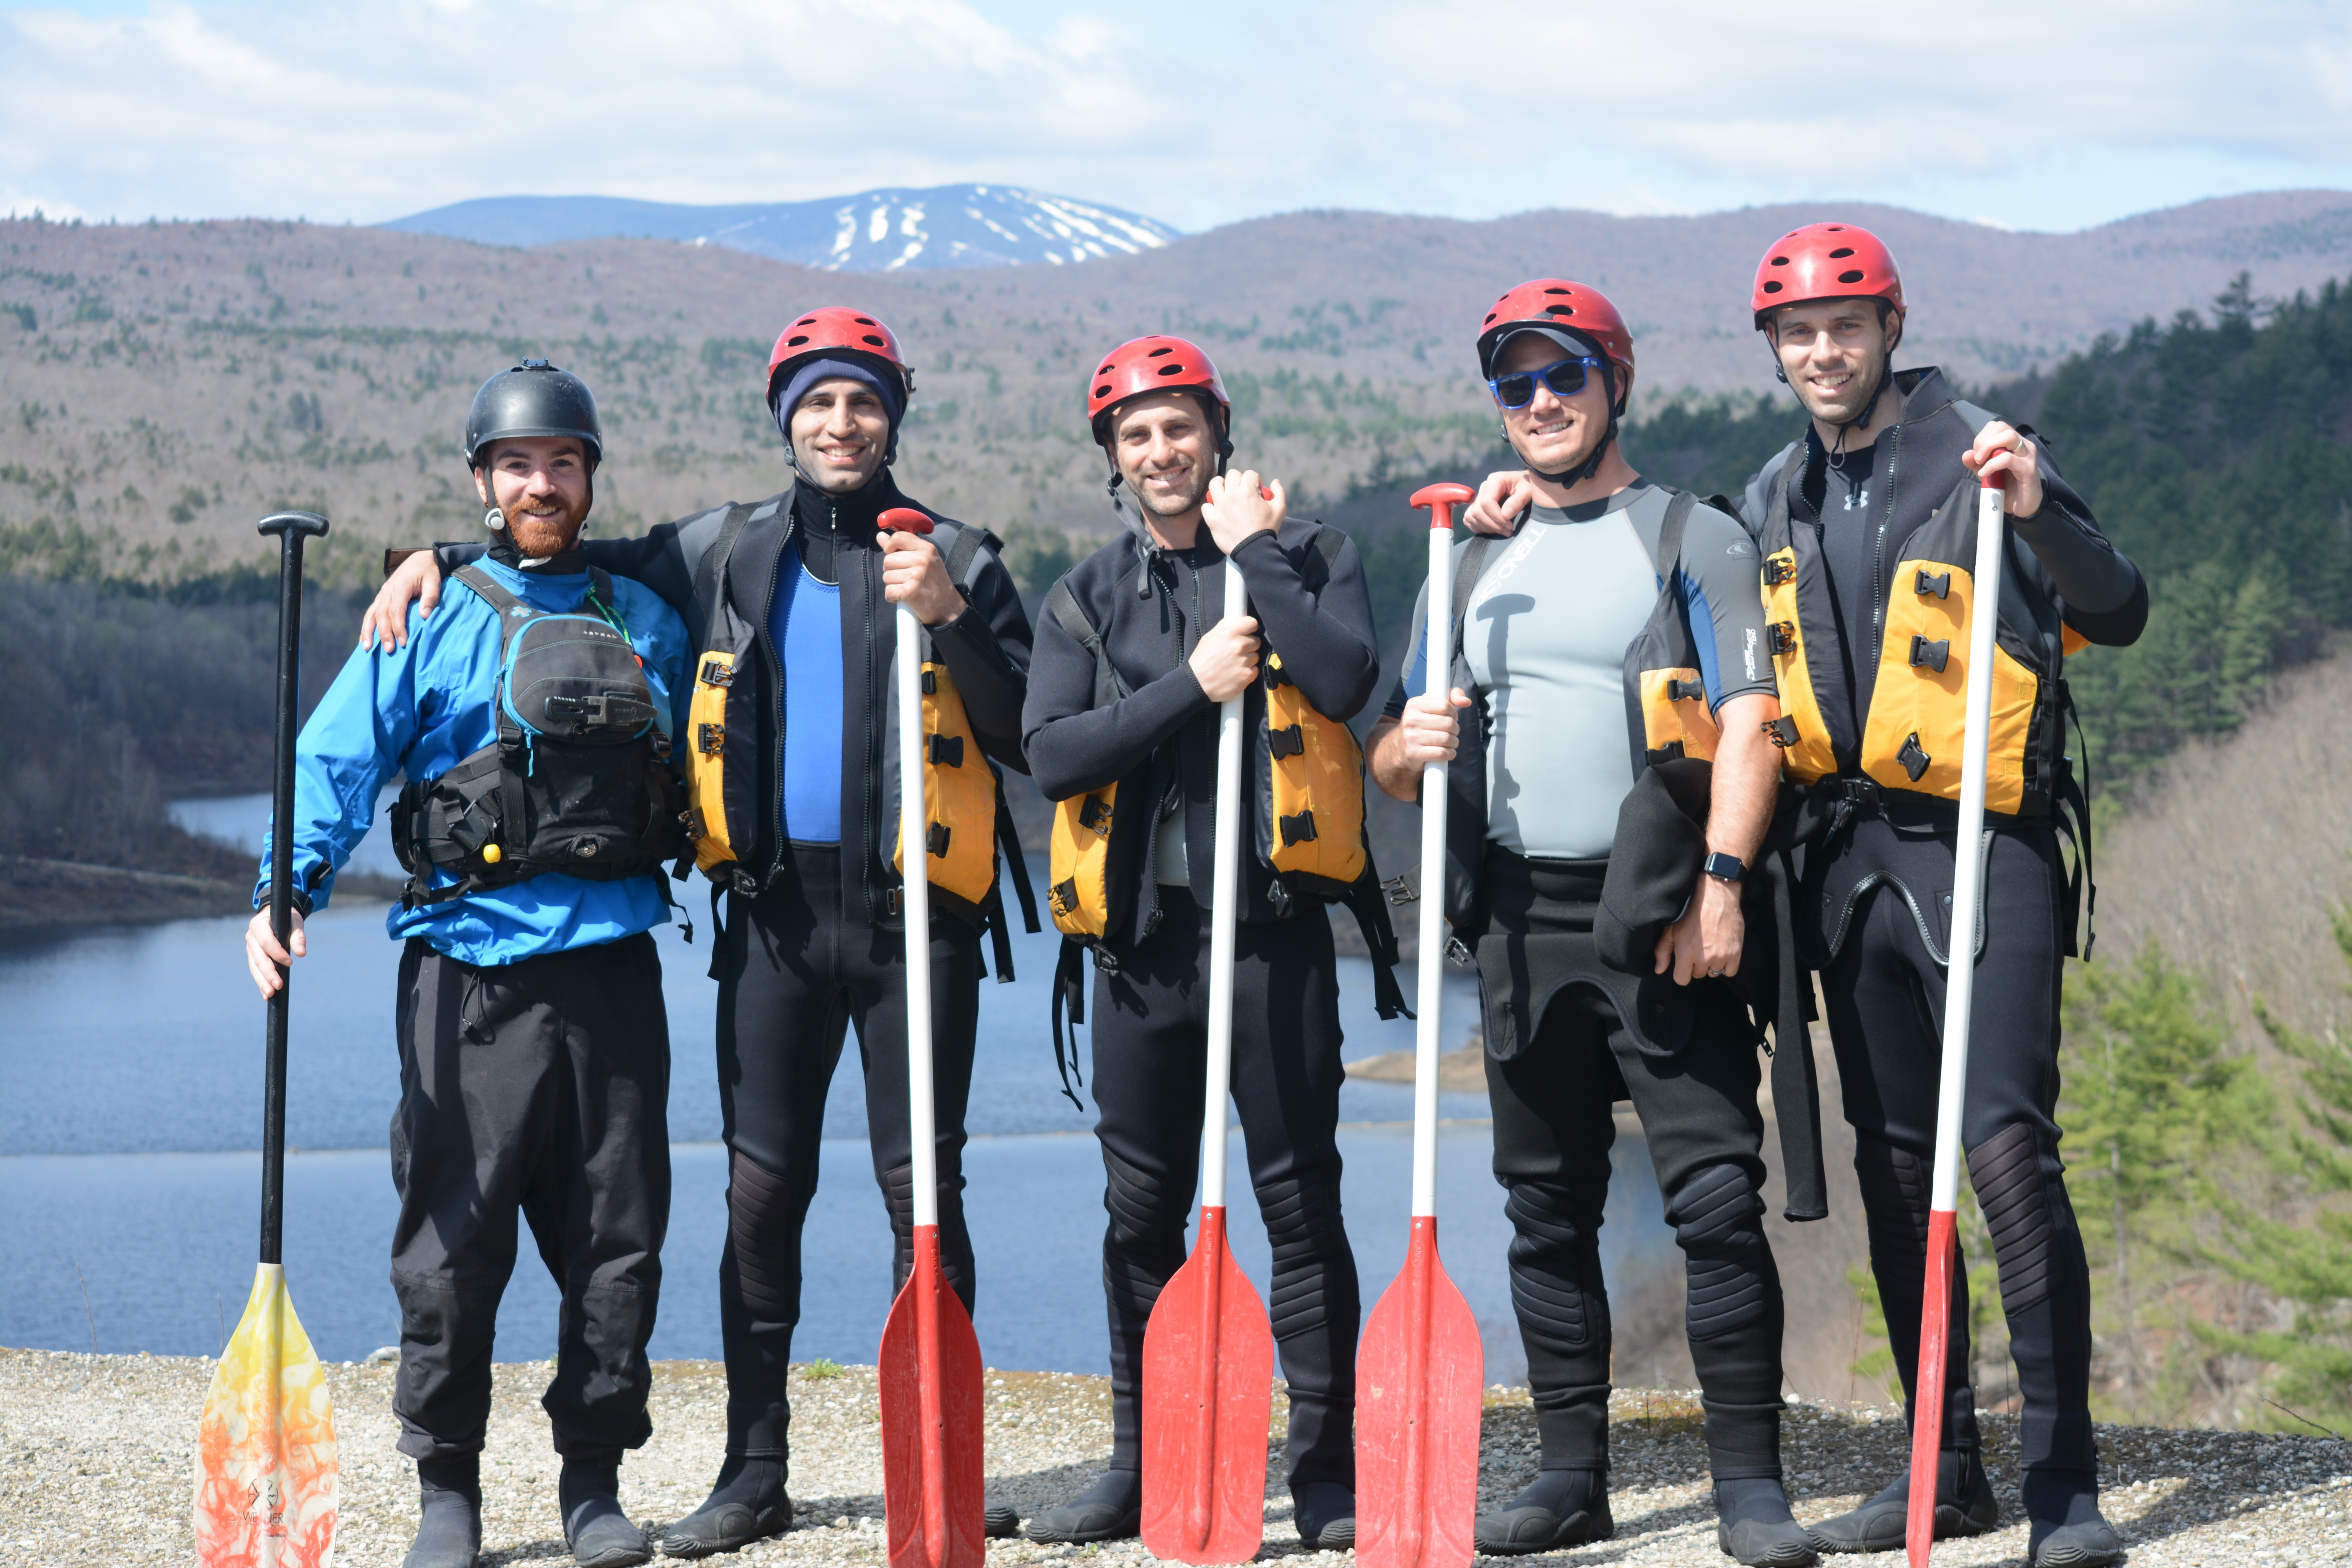 Bachelor party posing with their oars before rafting down a river.